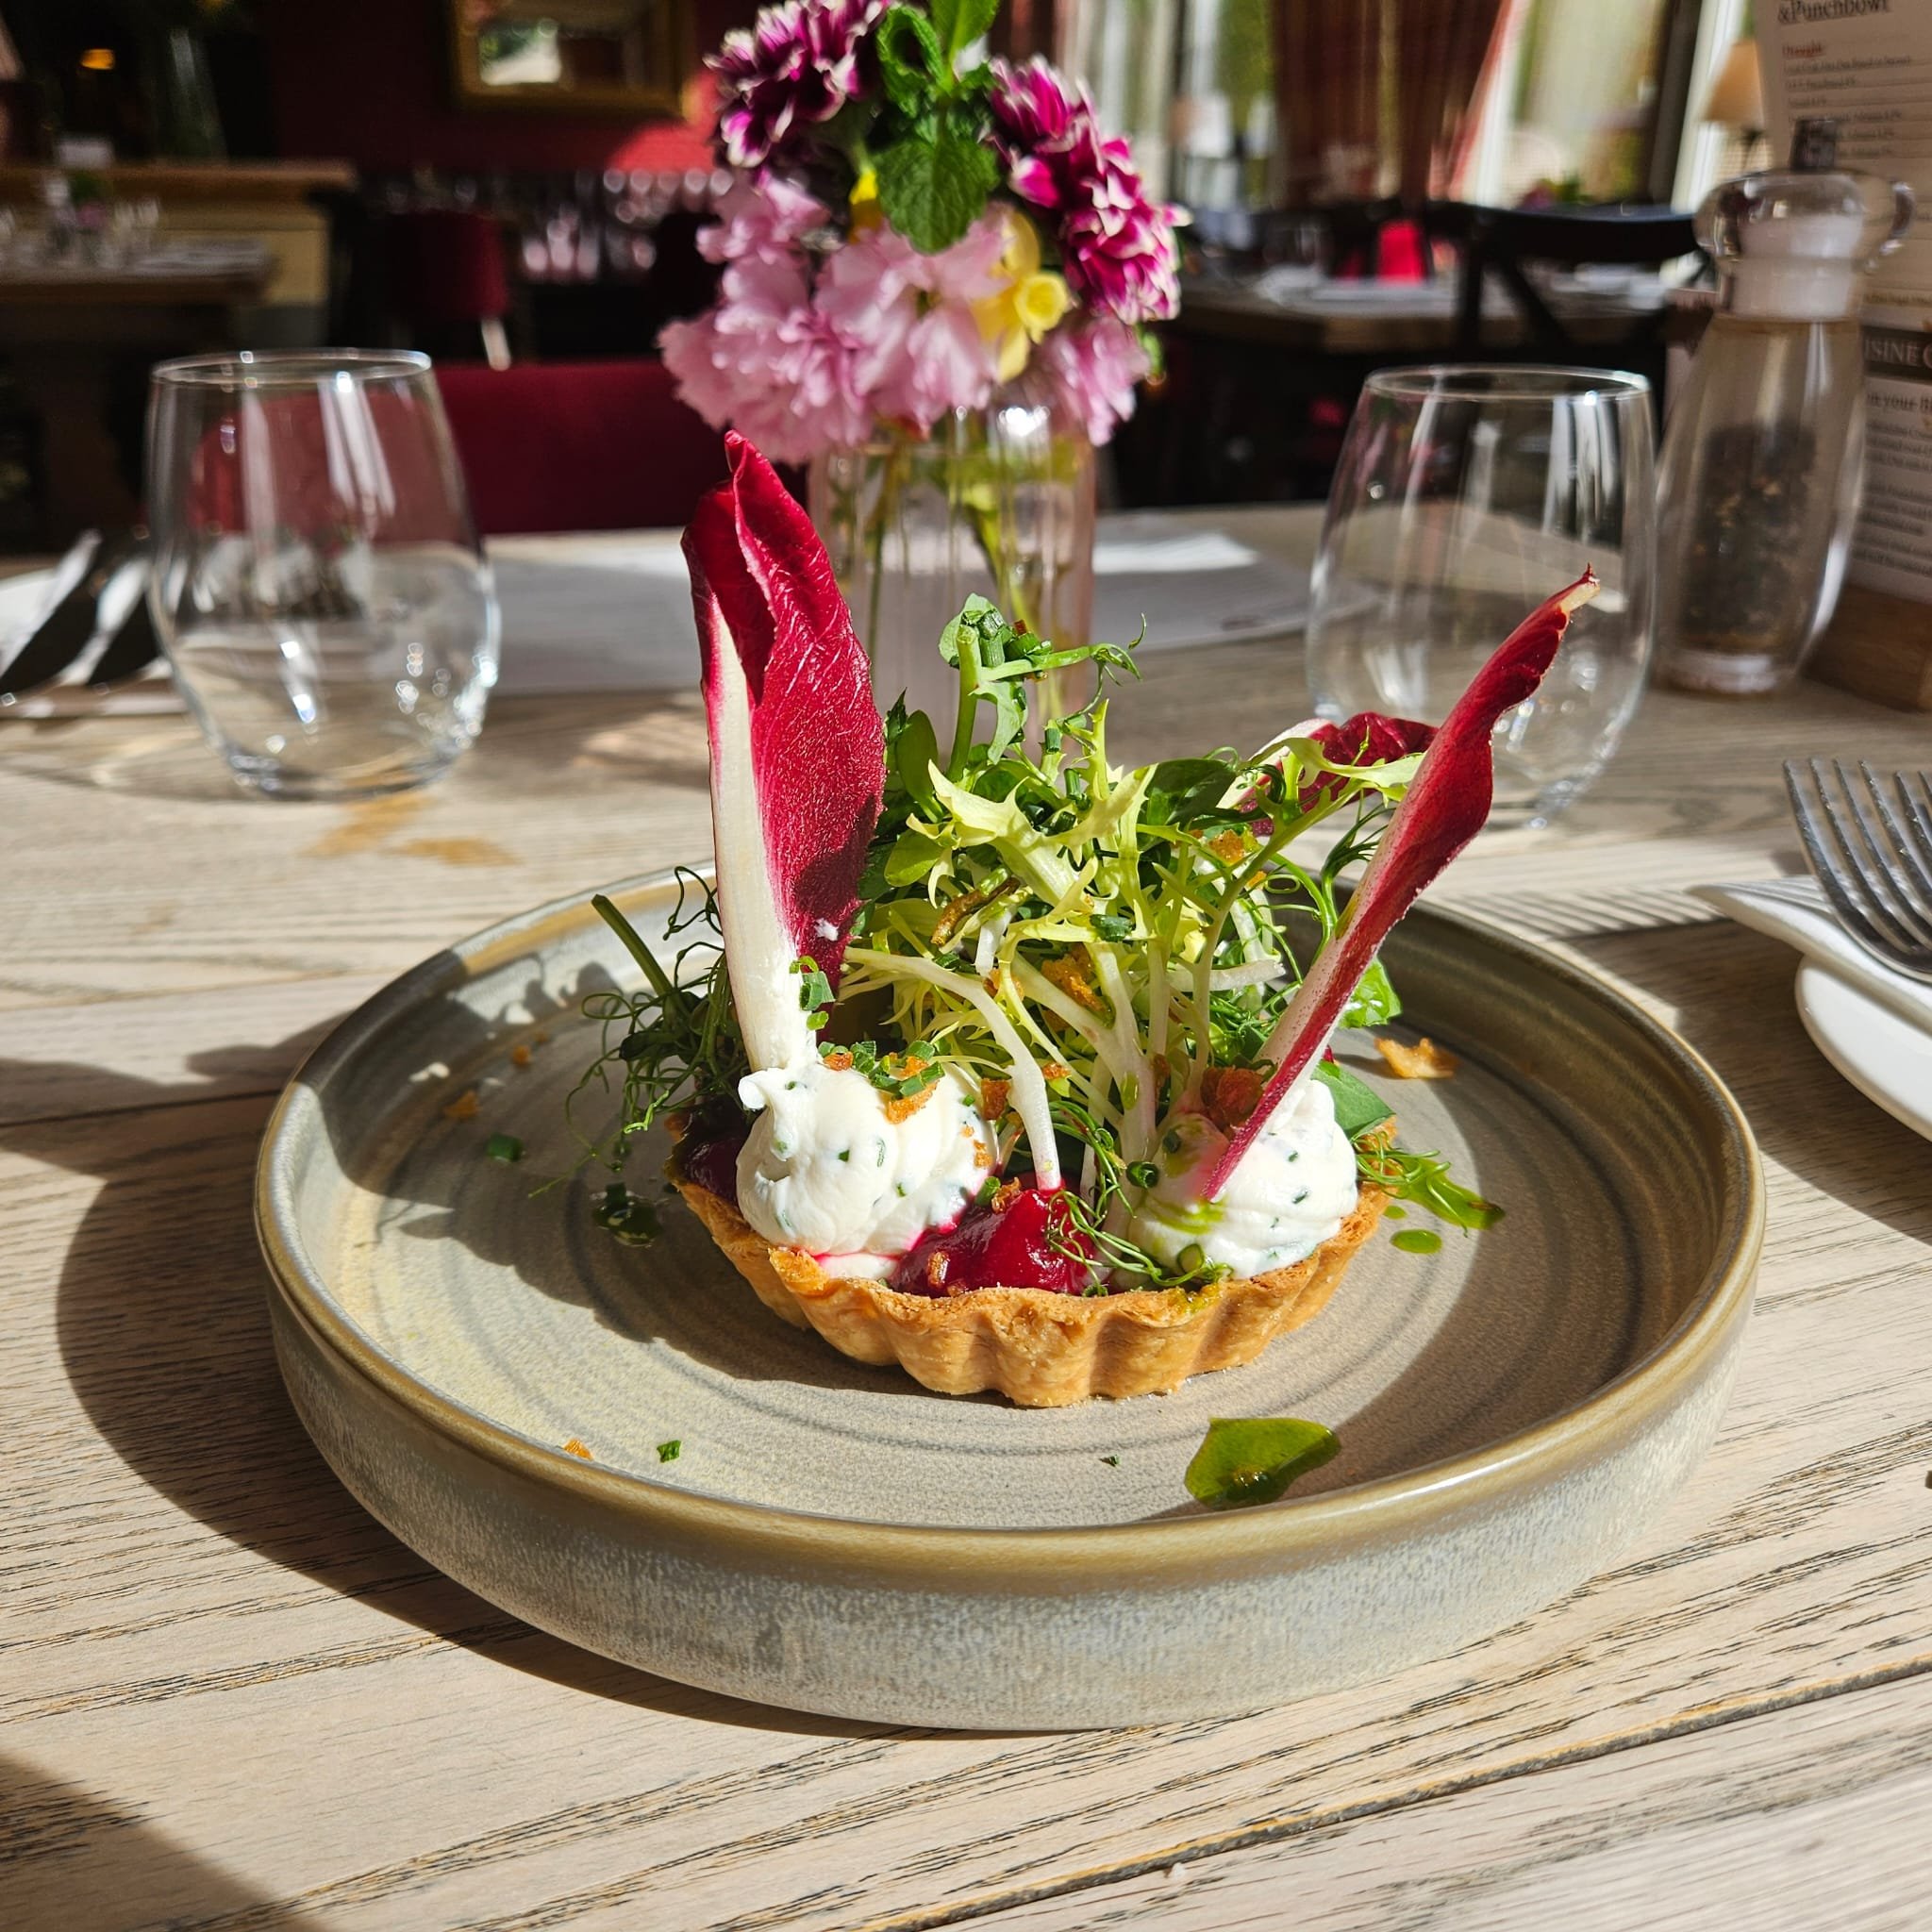 A taster of our new spring menu - coming soon 👑

🌱 Goats' cheese and pickled beetroot tart with endive.
🌱 Asparagus with crispy poached egg and truffled hollandaise.

#springmenu #crownandpunchbowl #comingsoon